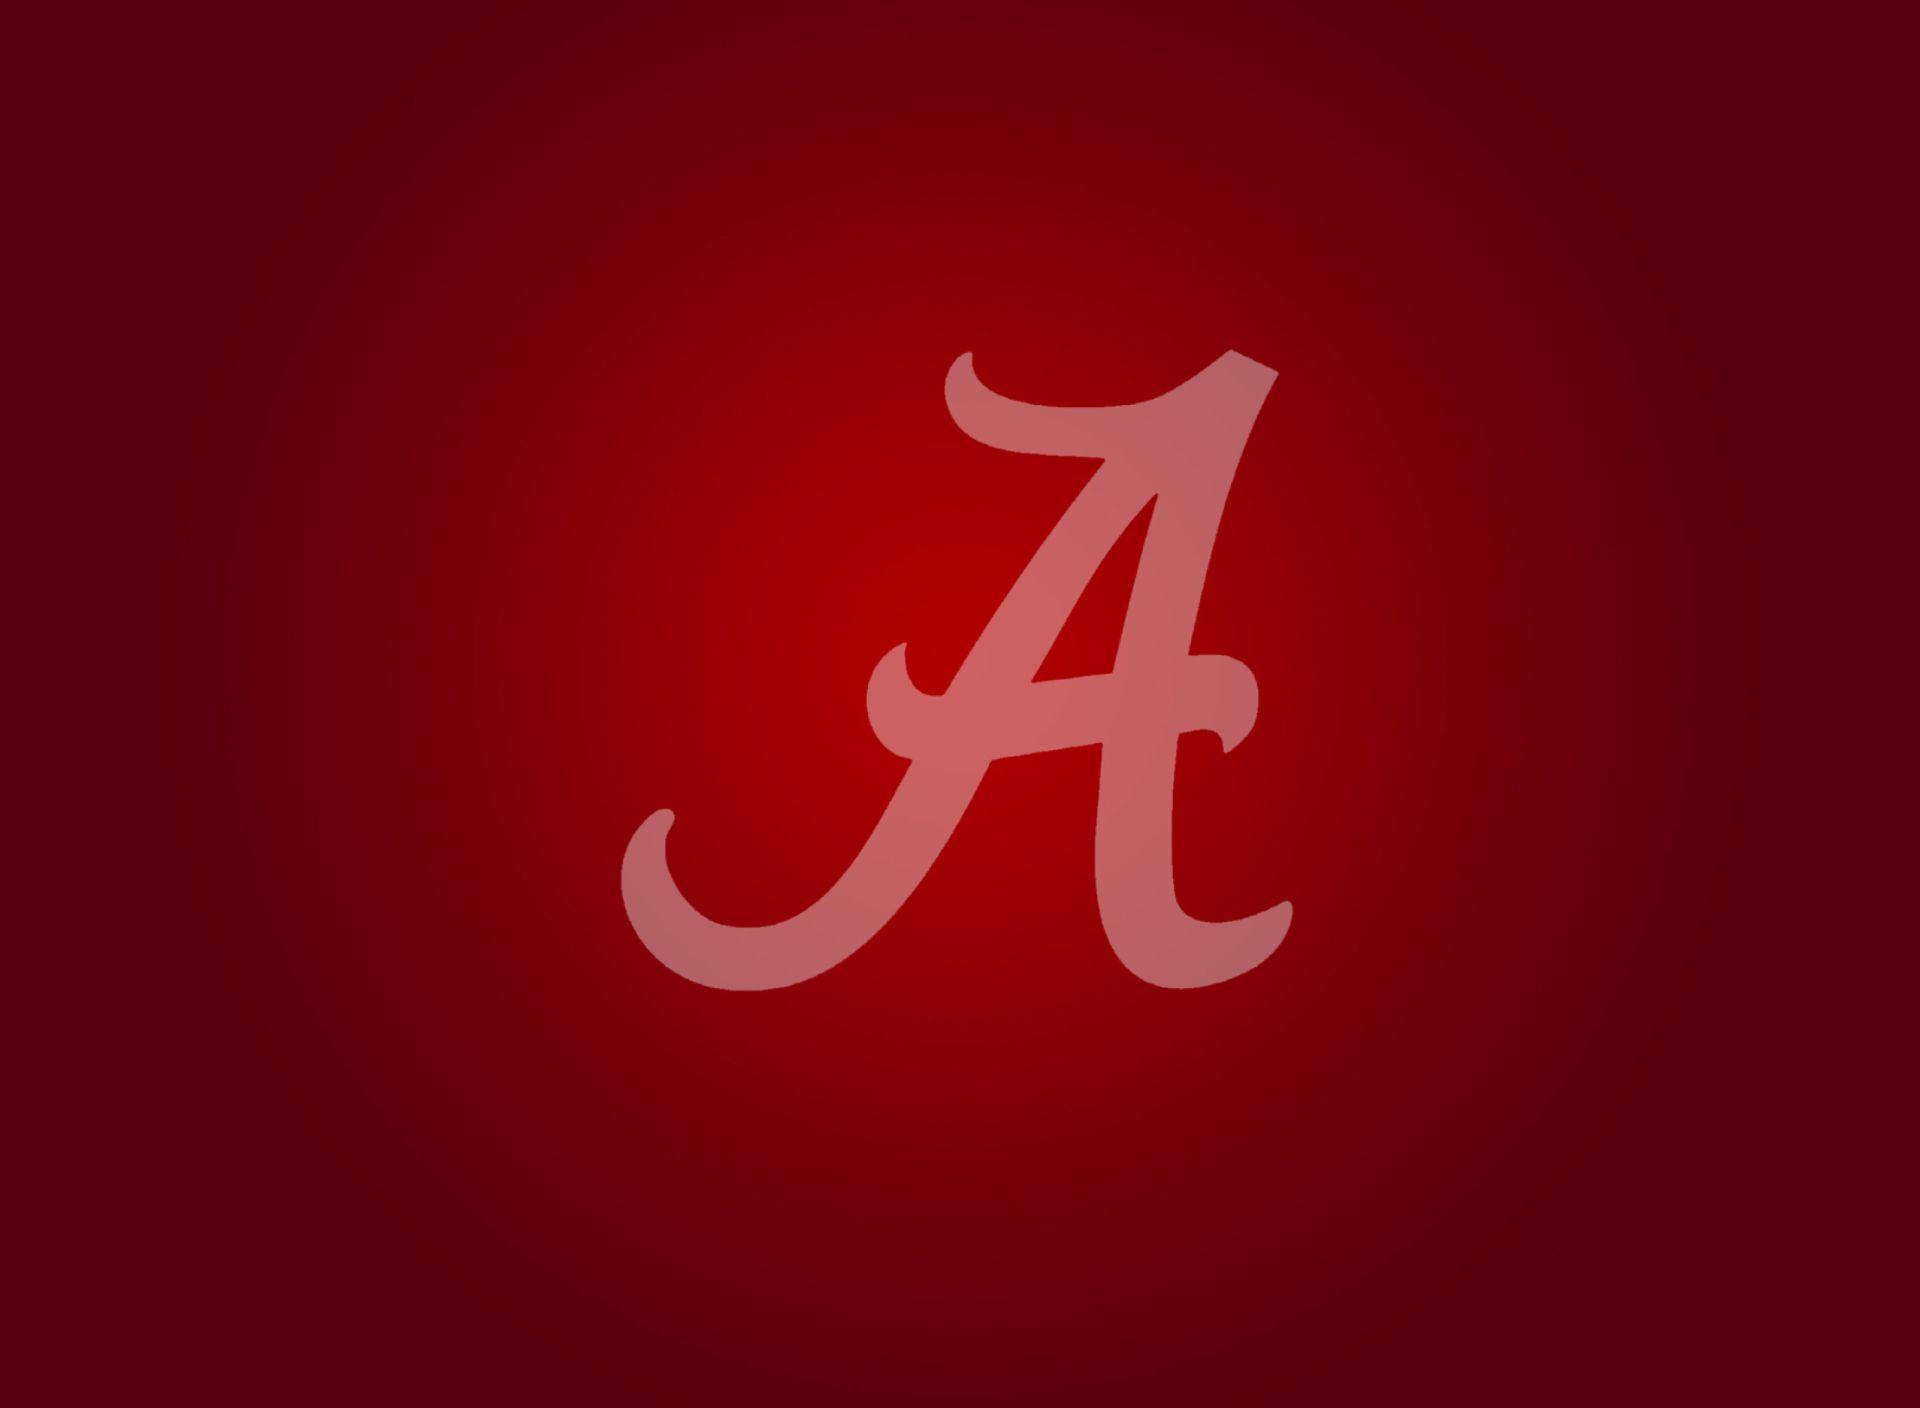 Background For Roll Tide Background